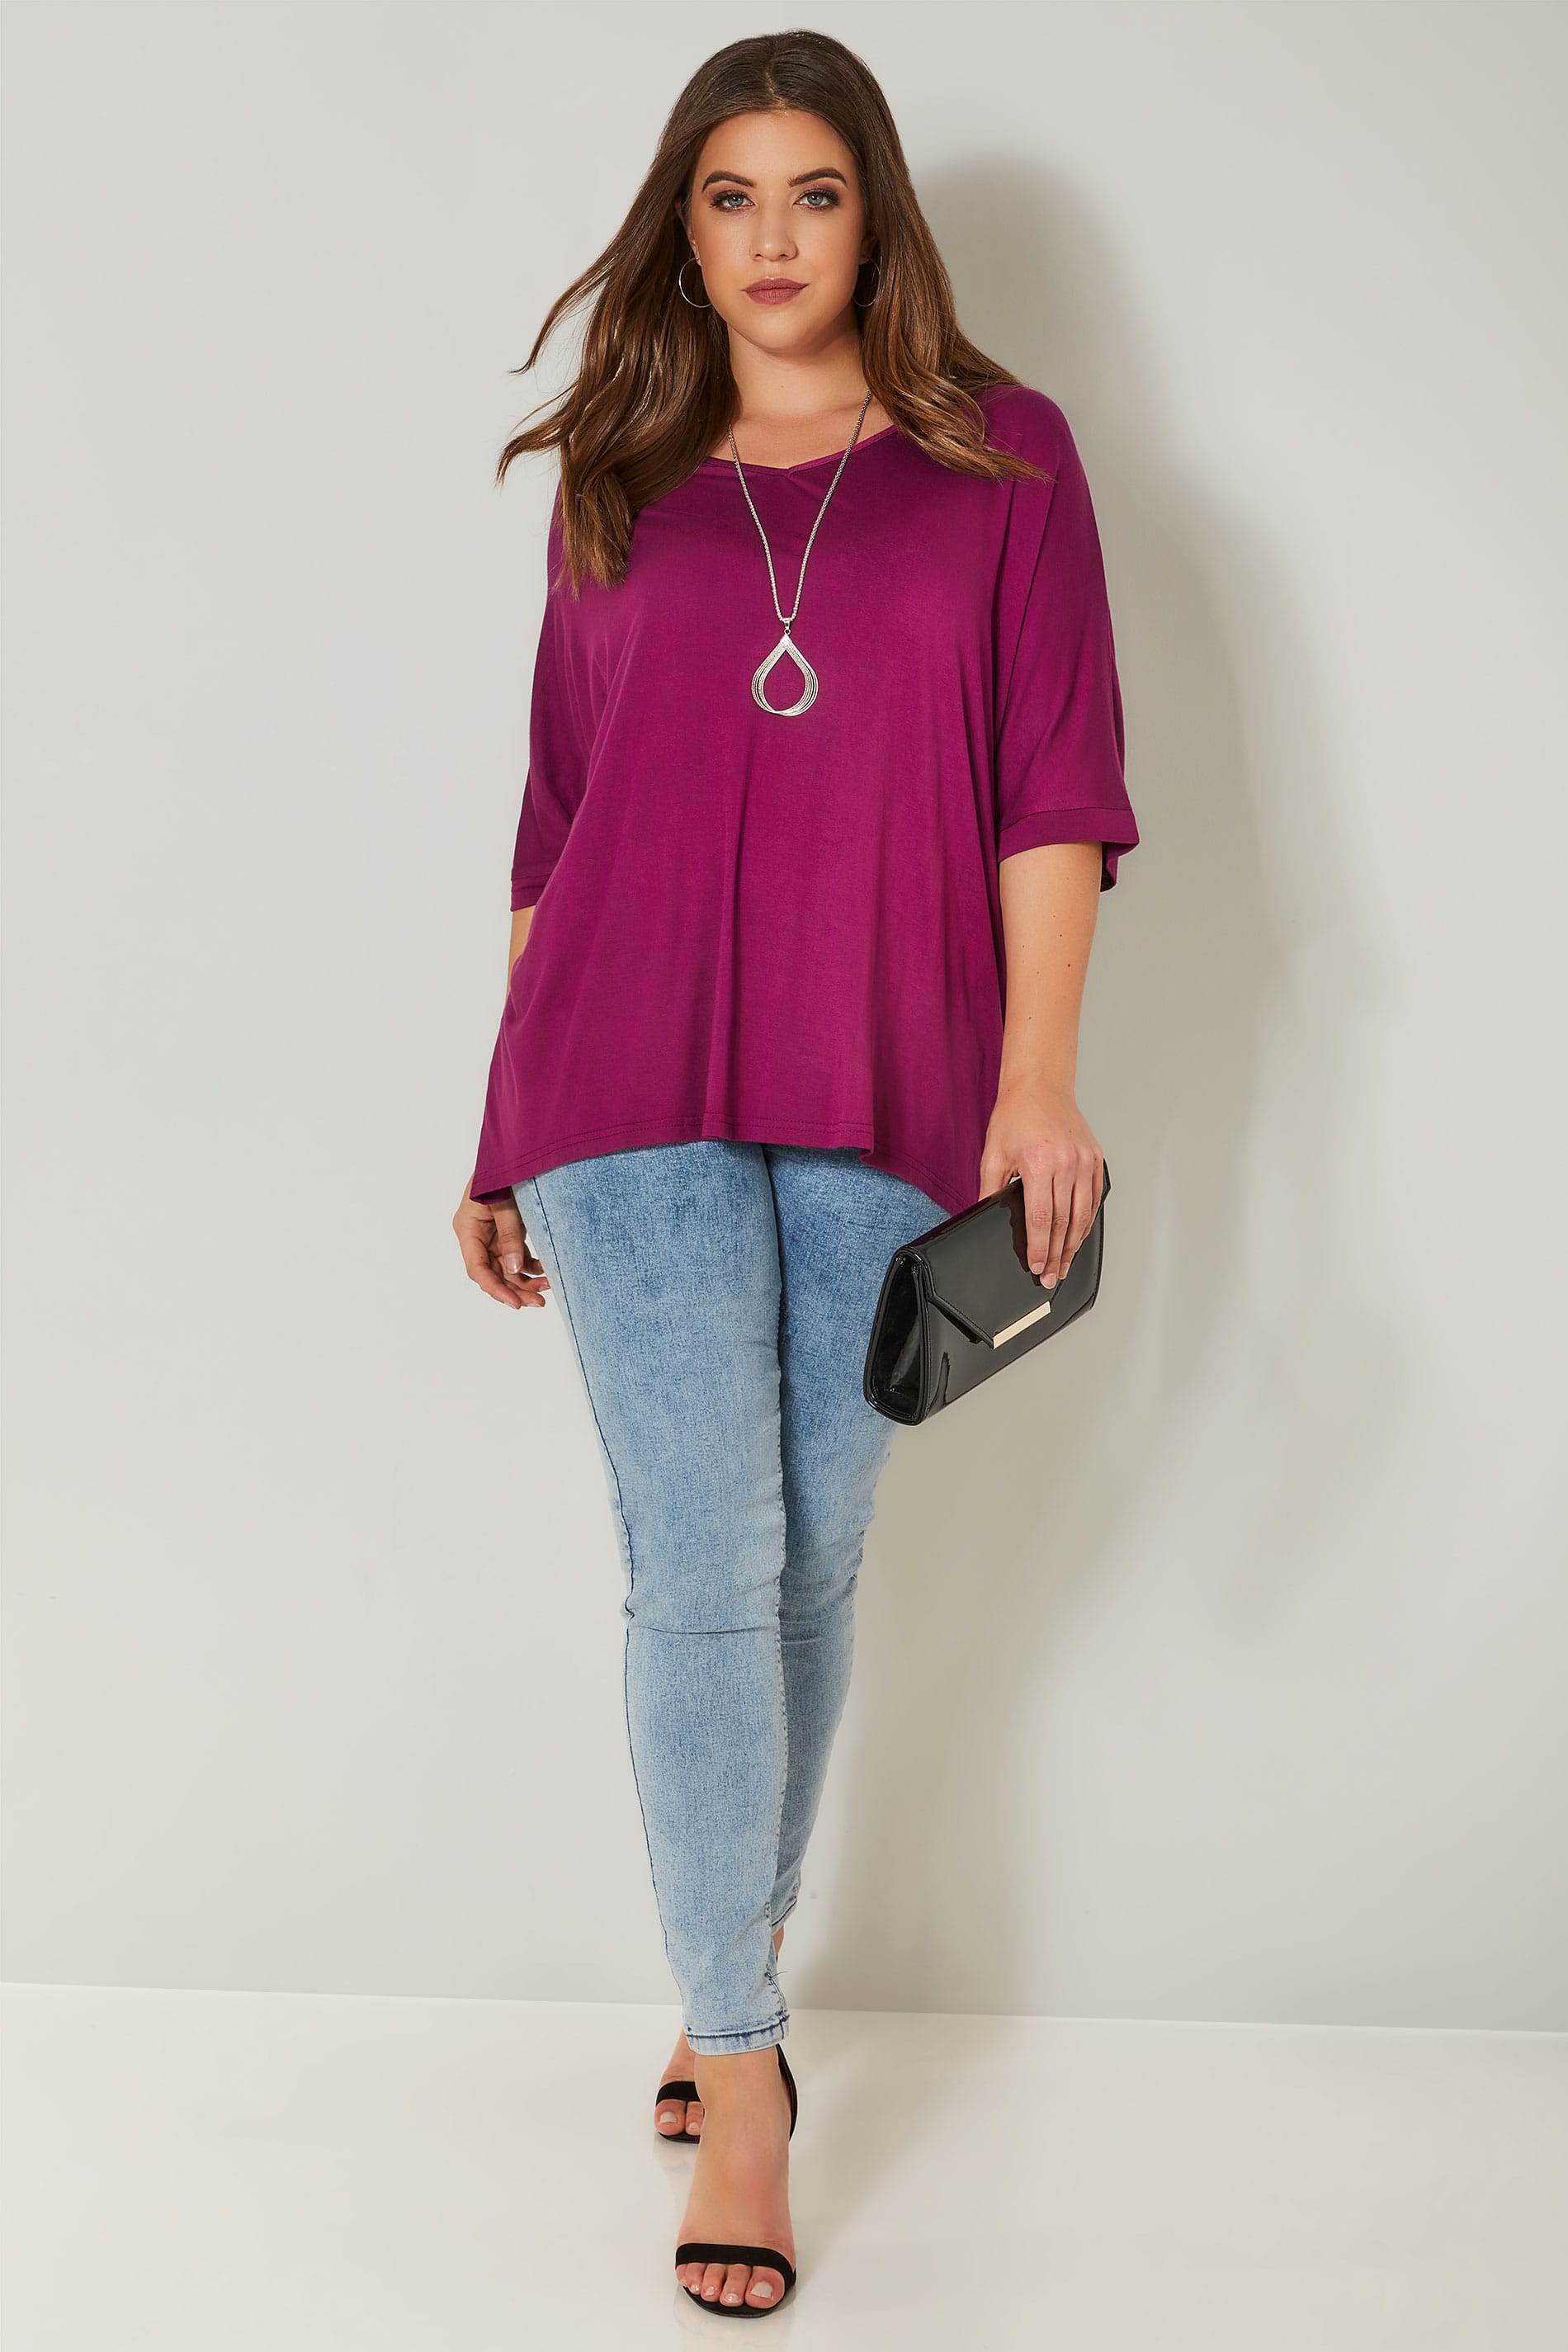 Magenta Pink Jersey Top Plus Size 16 To 36